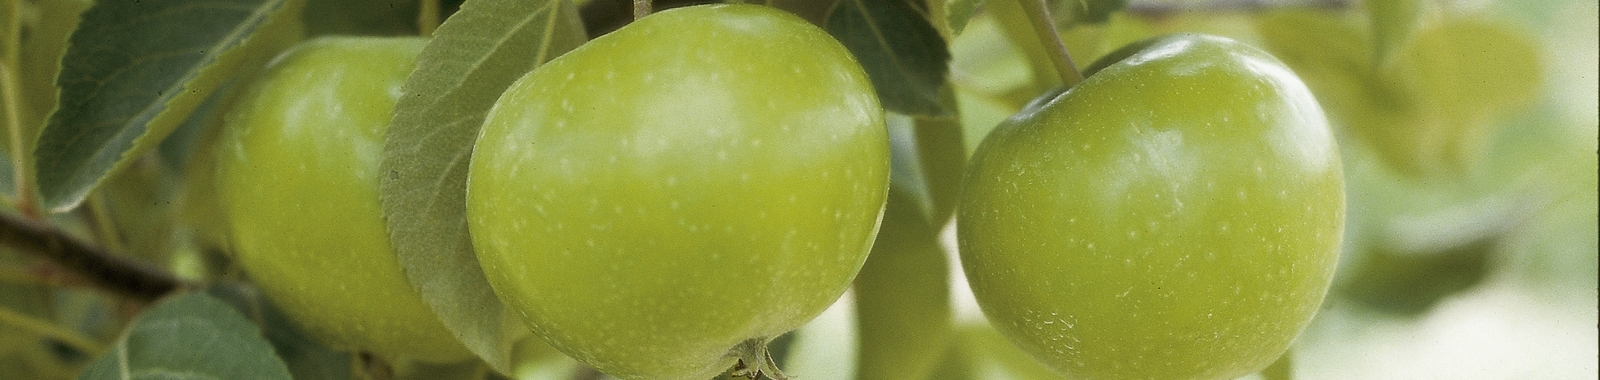 Role of Zinc in Pome Fruit Production